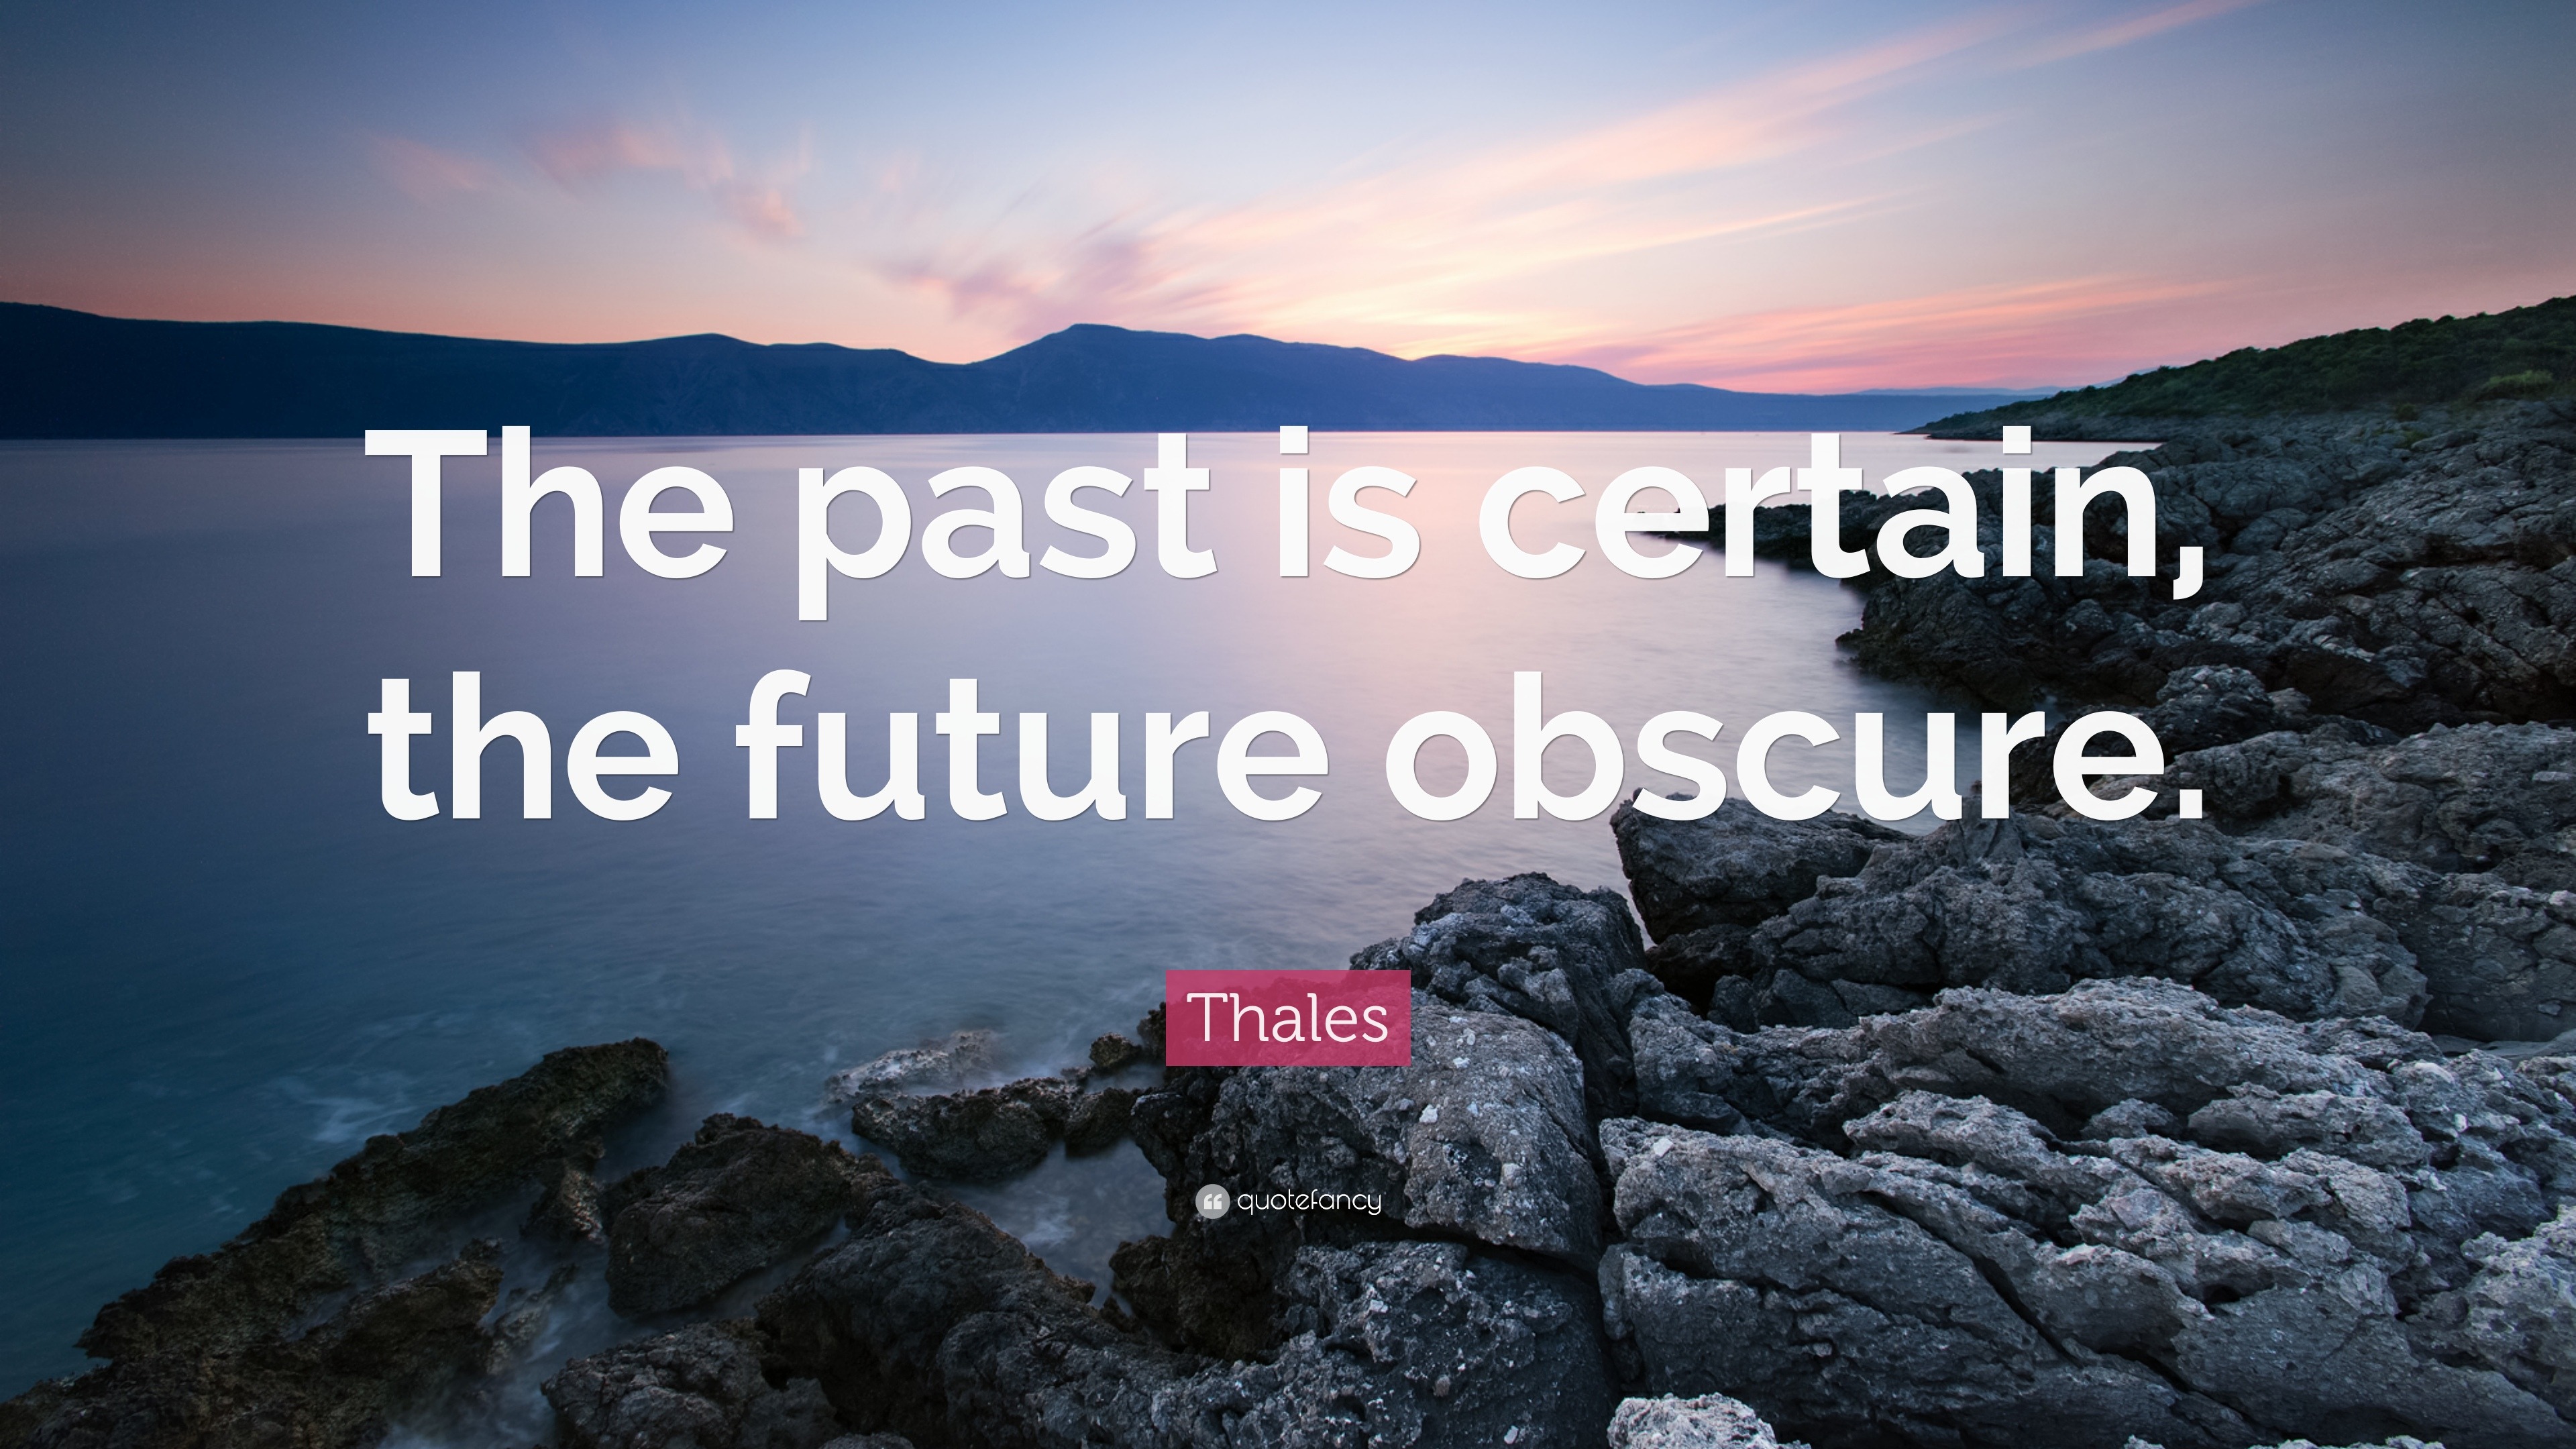 Thales Quote: “The past is certain, the future obscure.”